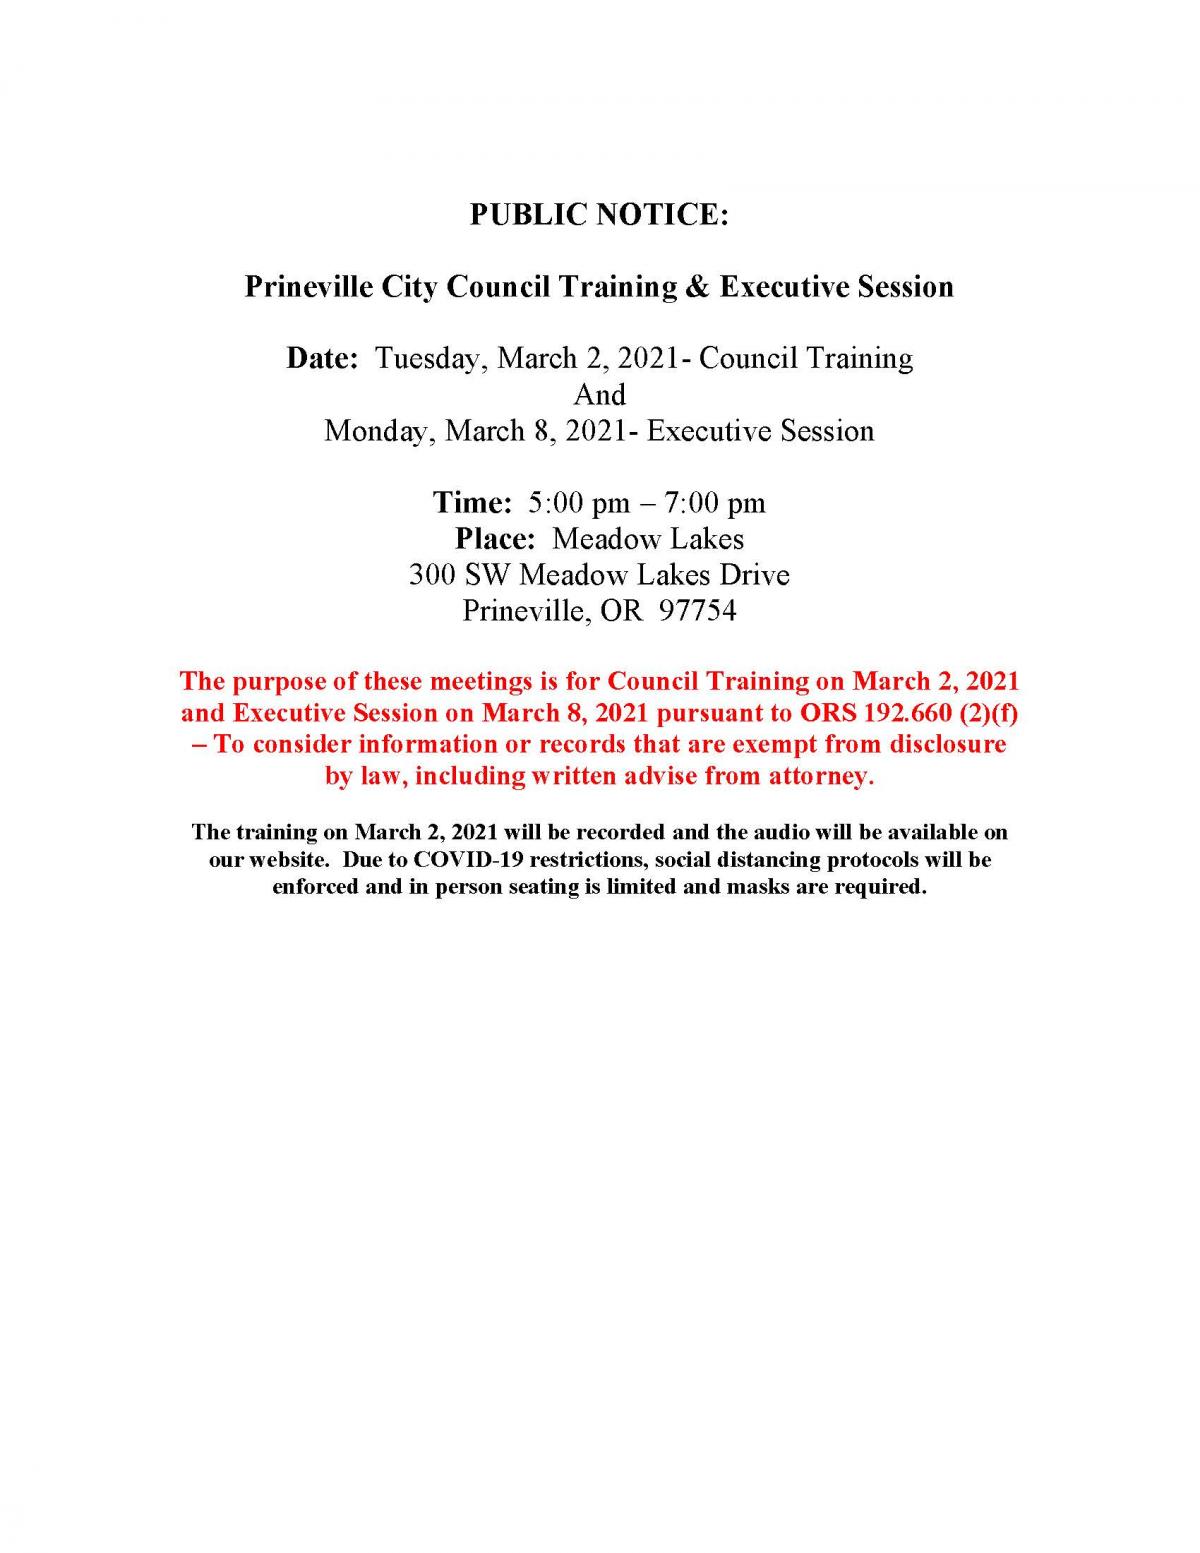 Public Notice - Council Training and Executive Session